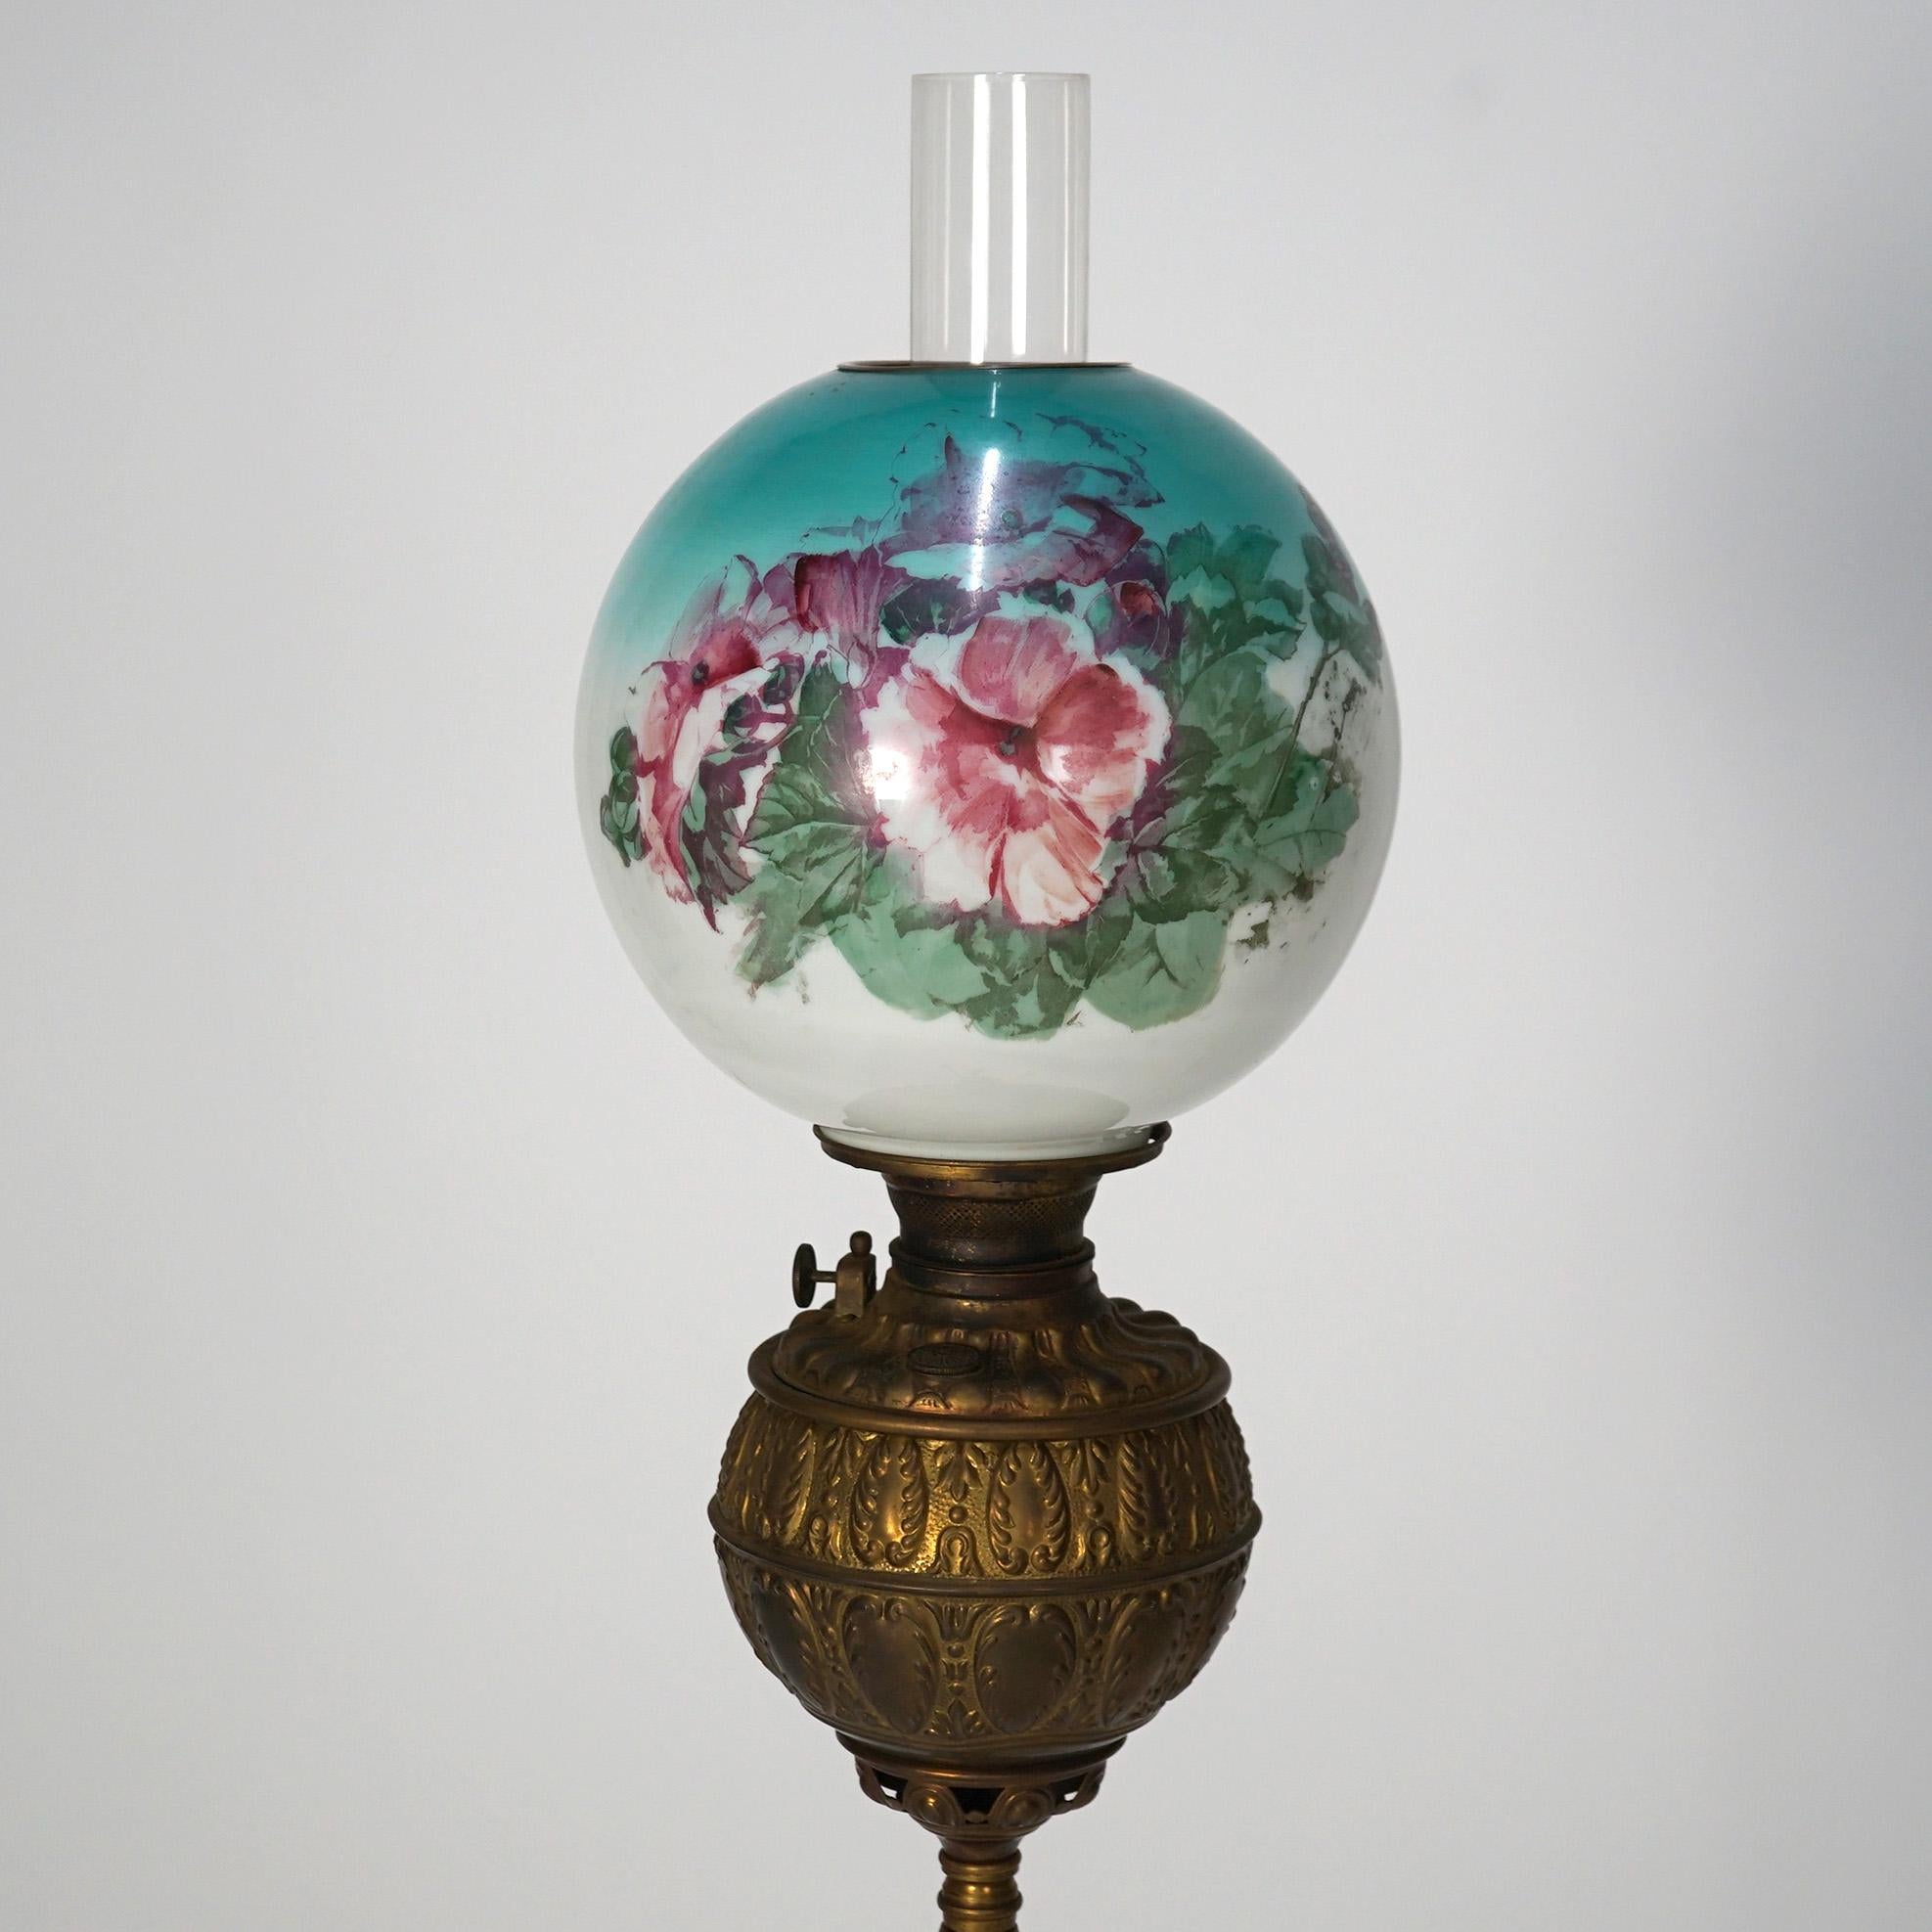 Antique Brass Telescoping Piano Oil Lamp & Hand Painted Floral Shade c1890 For Sale 7